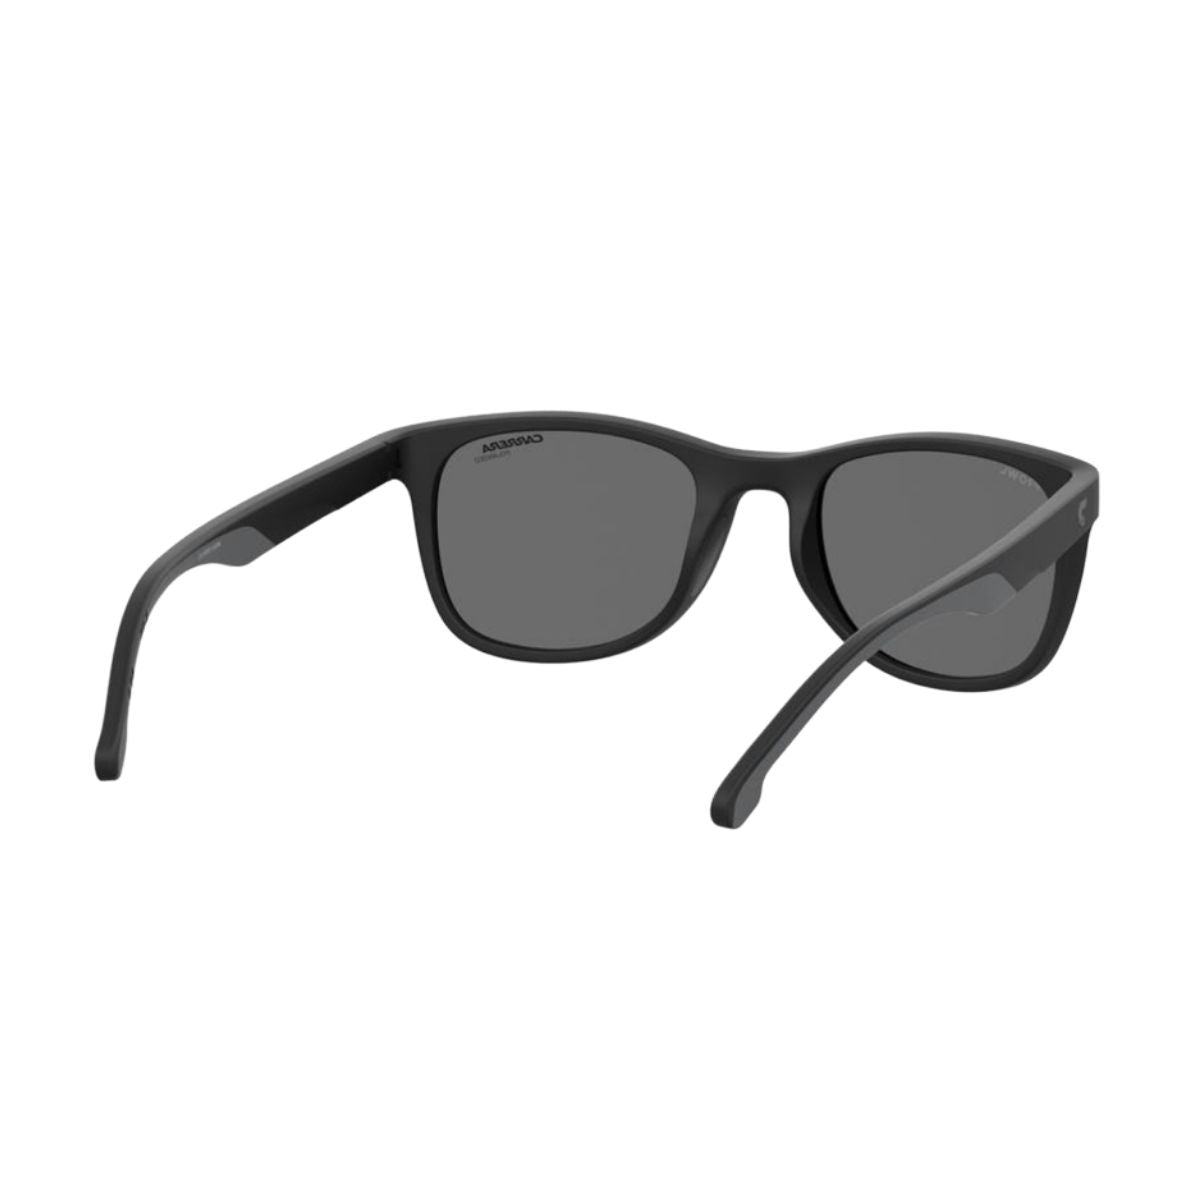 "Stylish Black Square Sunglasses For Both Mens And Womens At Optorium"